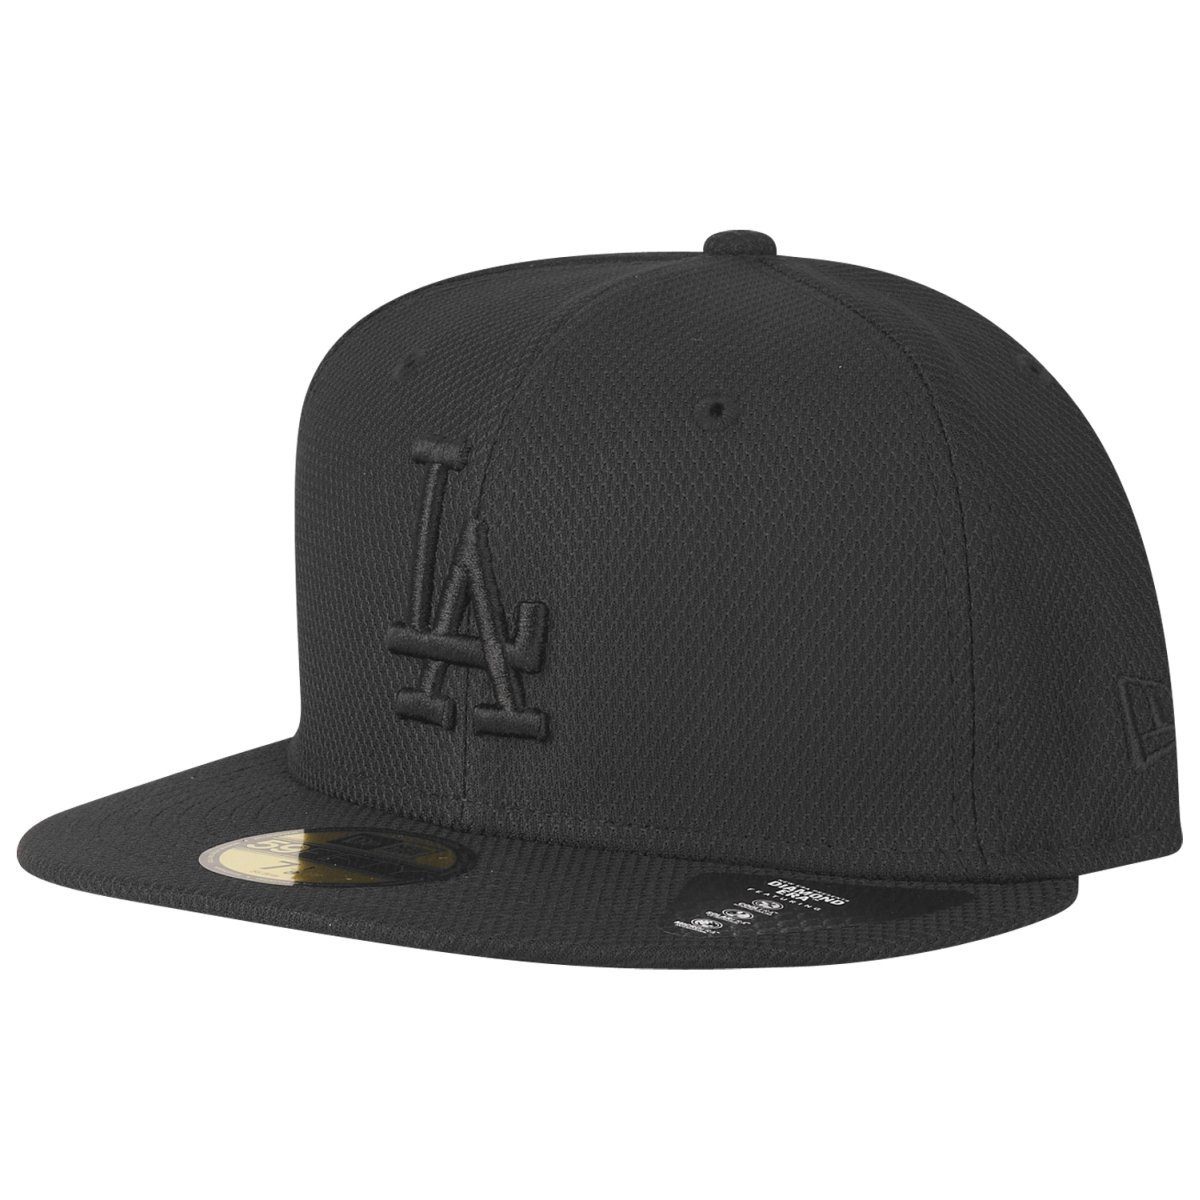 Angeles New Los Era Dodgers Fitted Cap 59Fifty DIAMOND